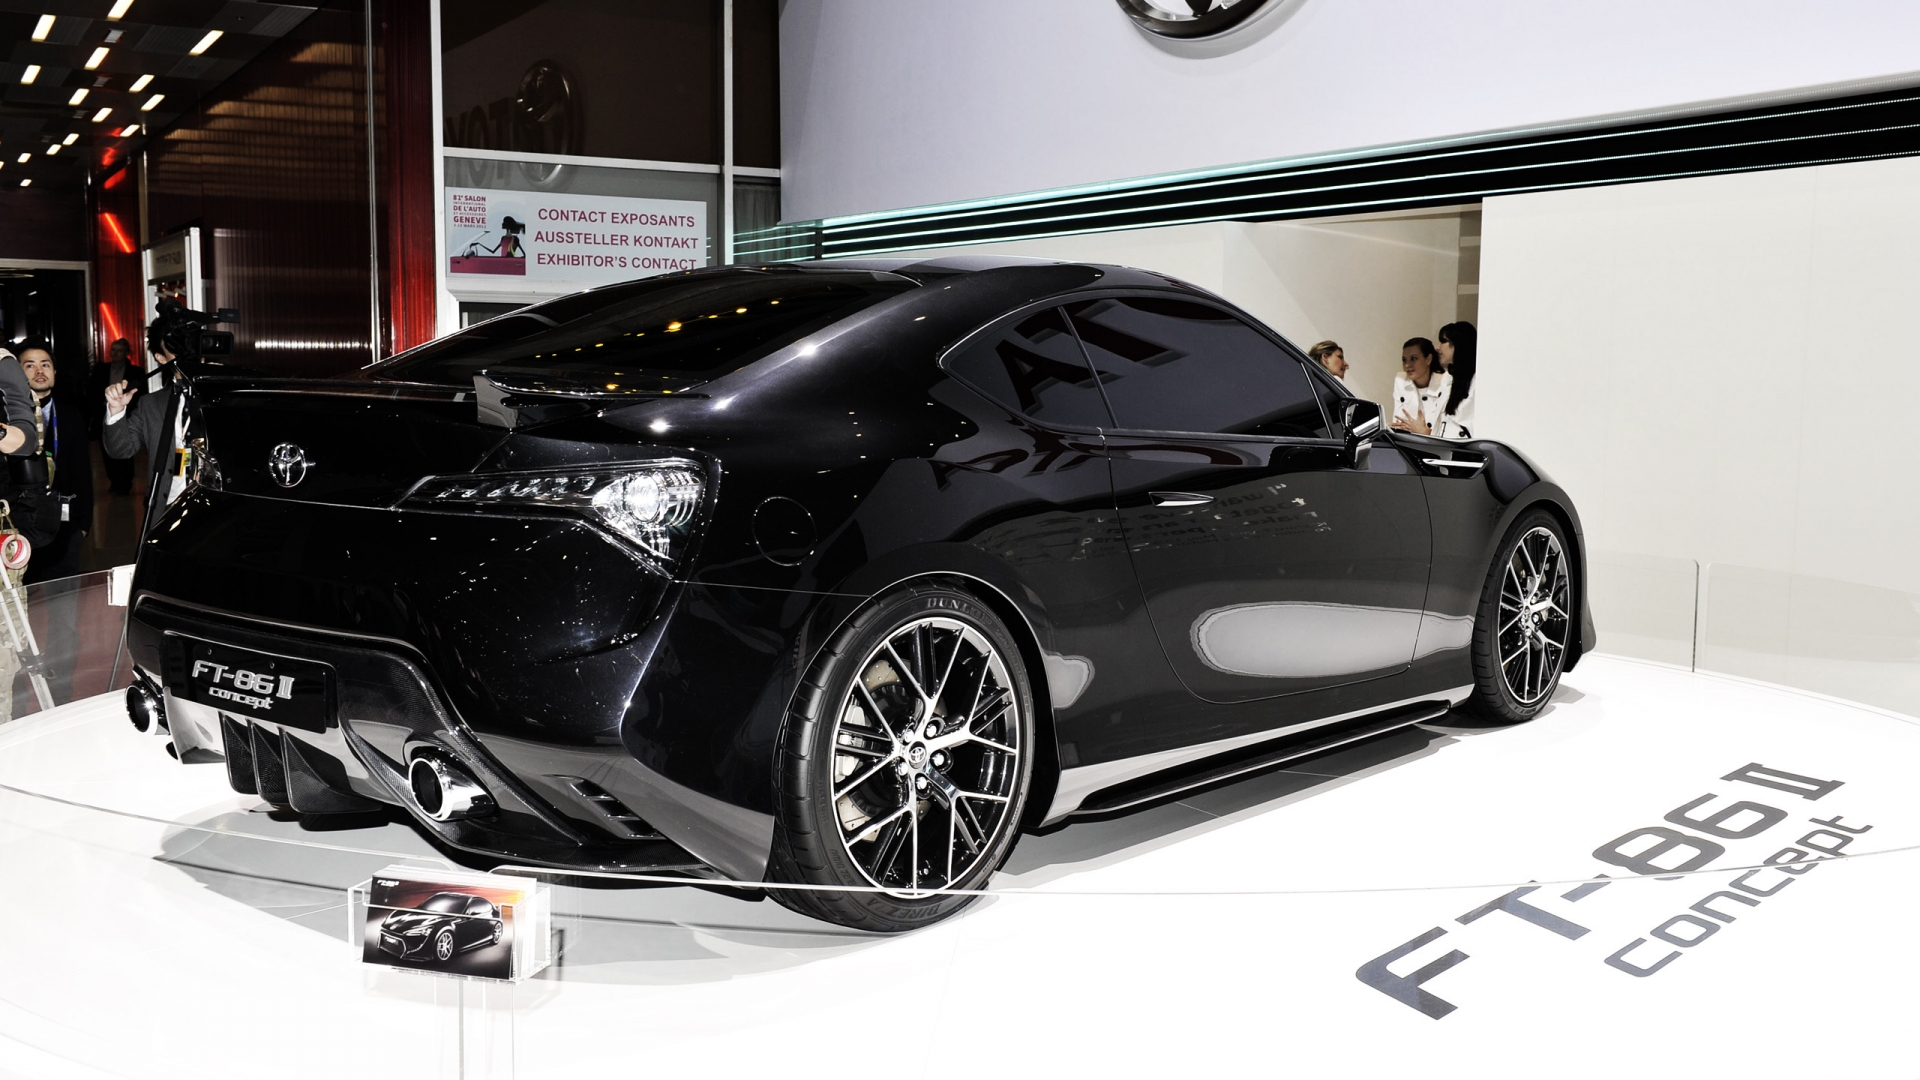 Toyota FT-86 II Rear for 1920 x 1080 HDTV 1080p resolution